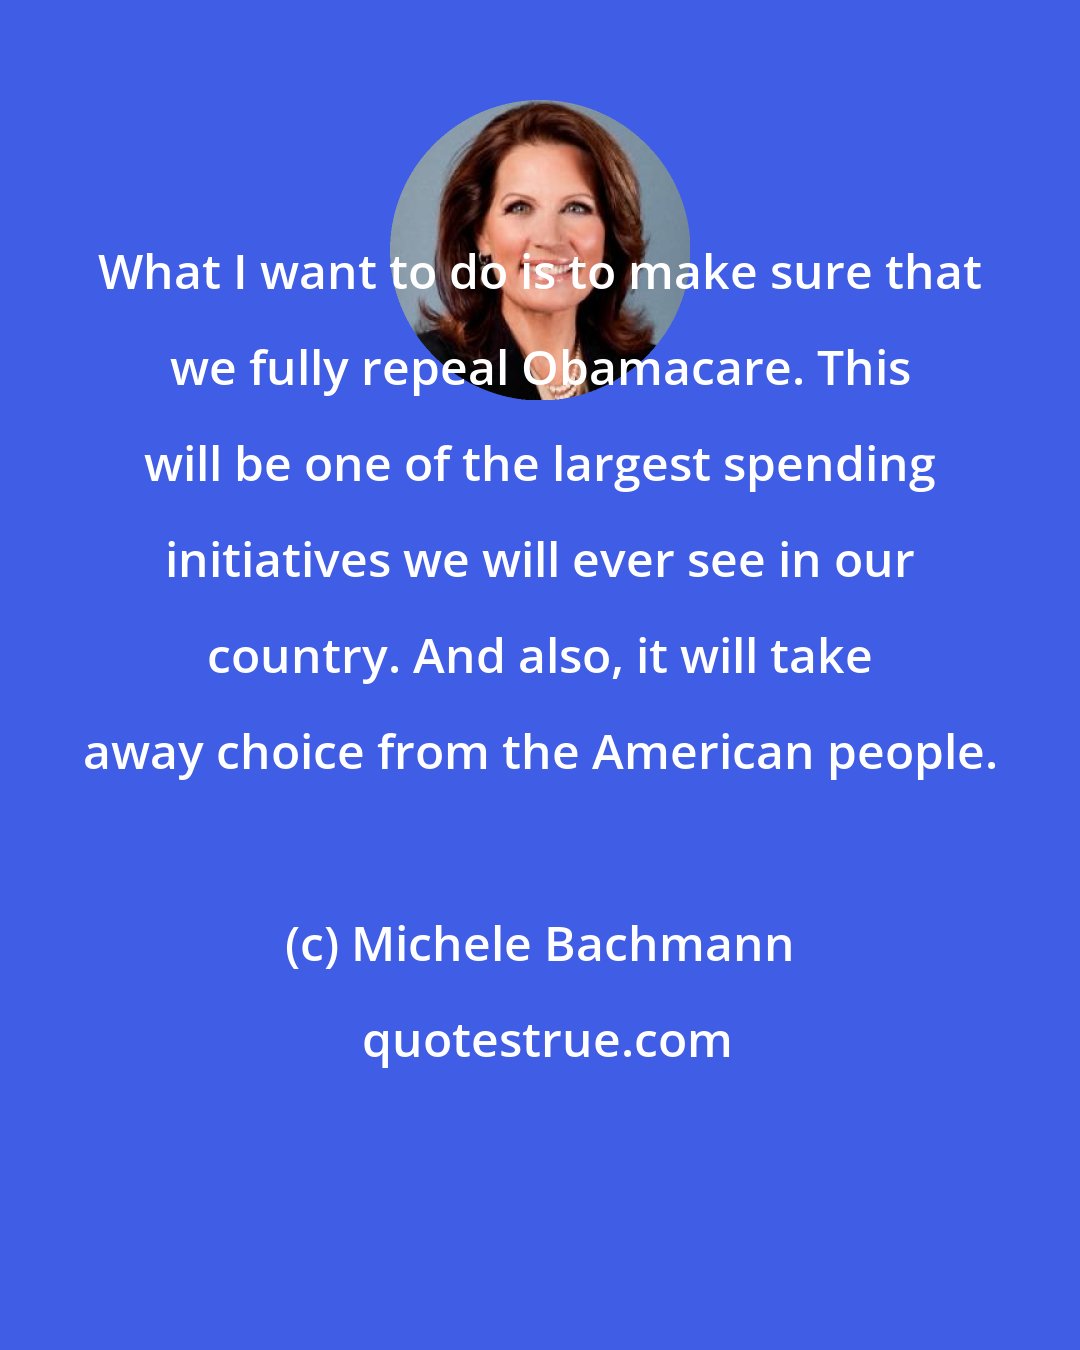 Michele Bachmann: What I want to do is to make sure that we fully repeal Obamacare. This will be one of the largest spending initiatives we will ever see in our country. And also, it will take away choice from the American people.